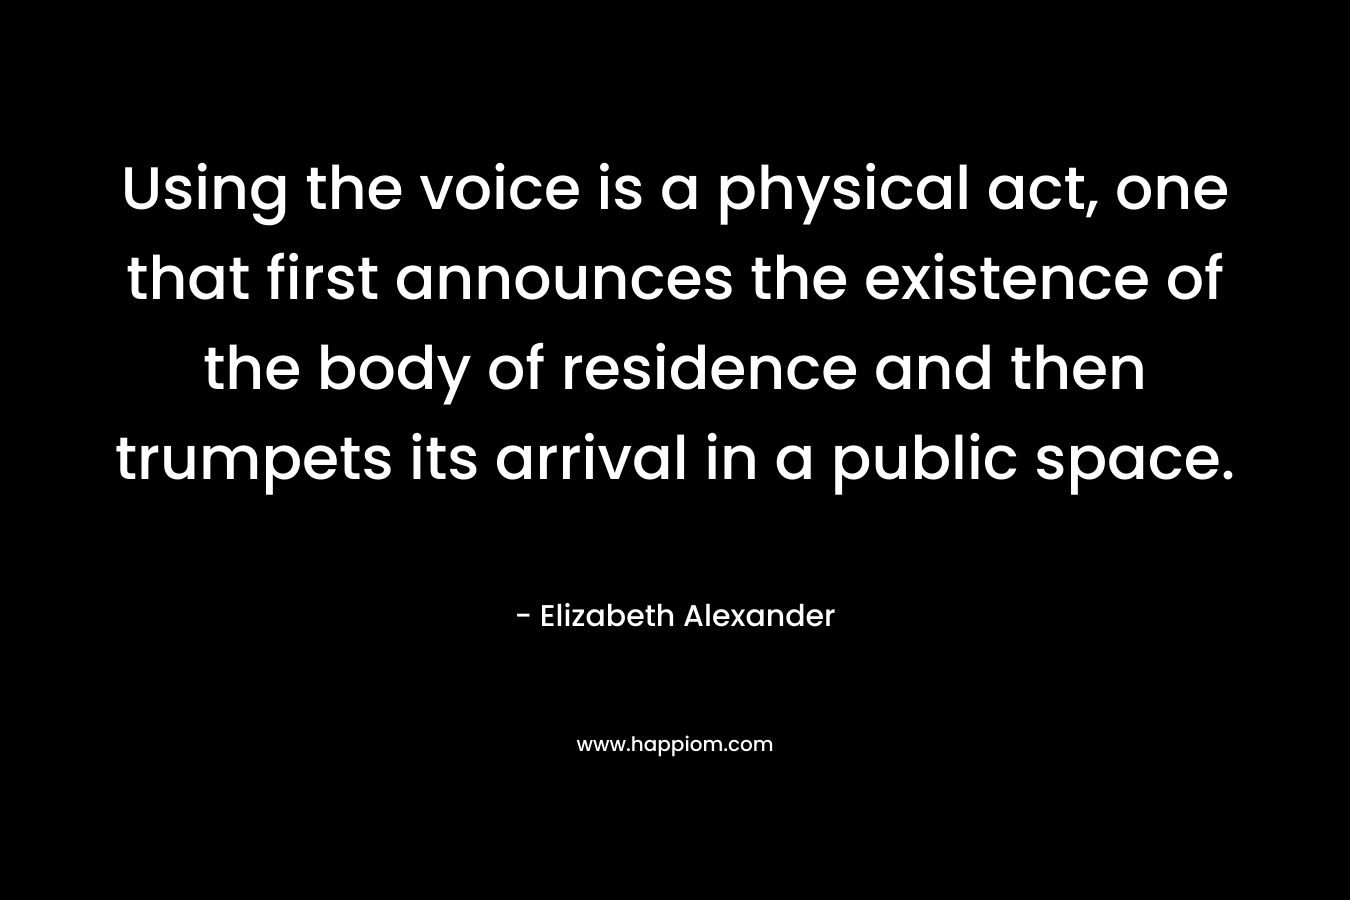 Using the voice is a physical act, one that first announces the existence of the body of residence and then trumpets its arrival in a public space.